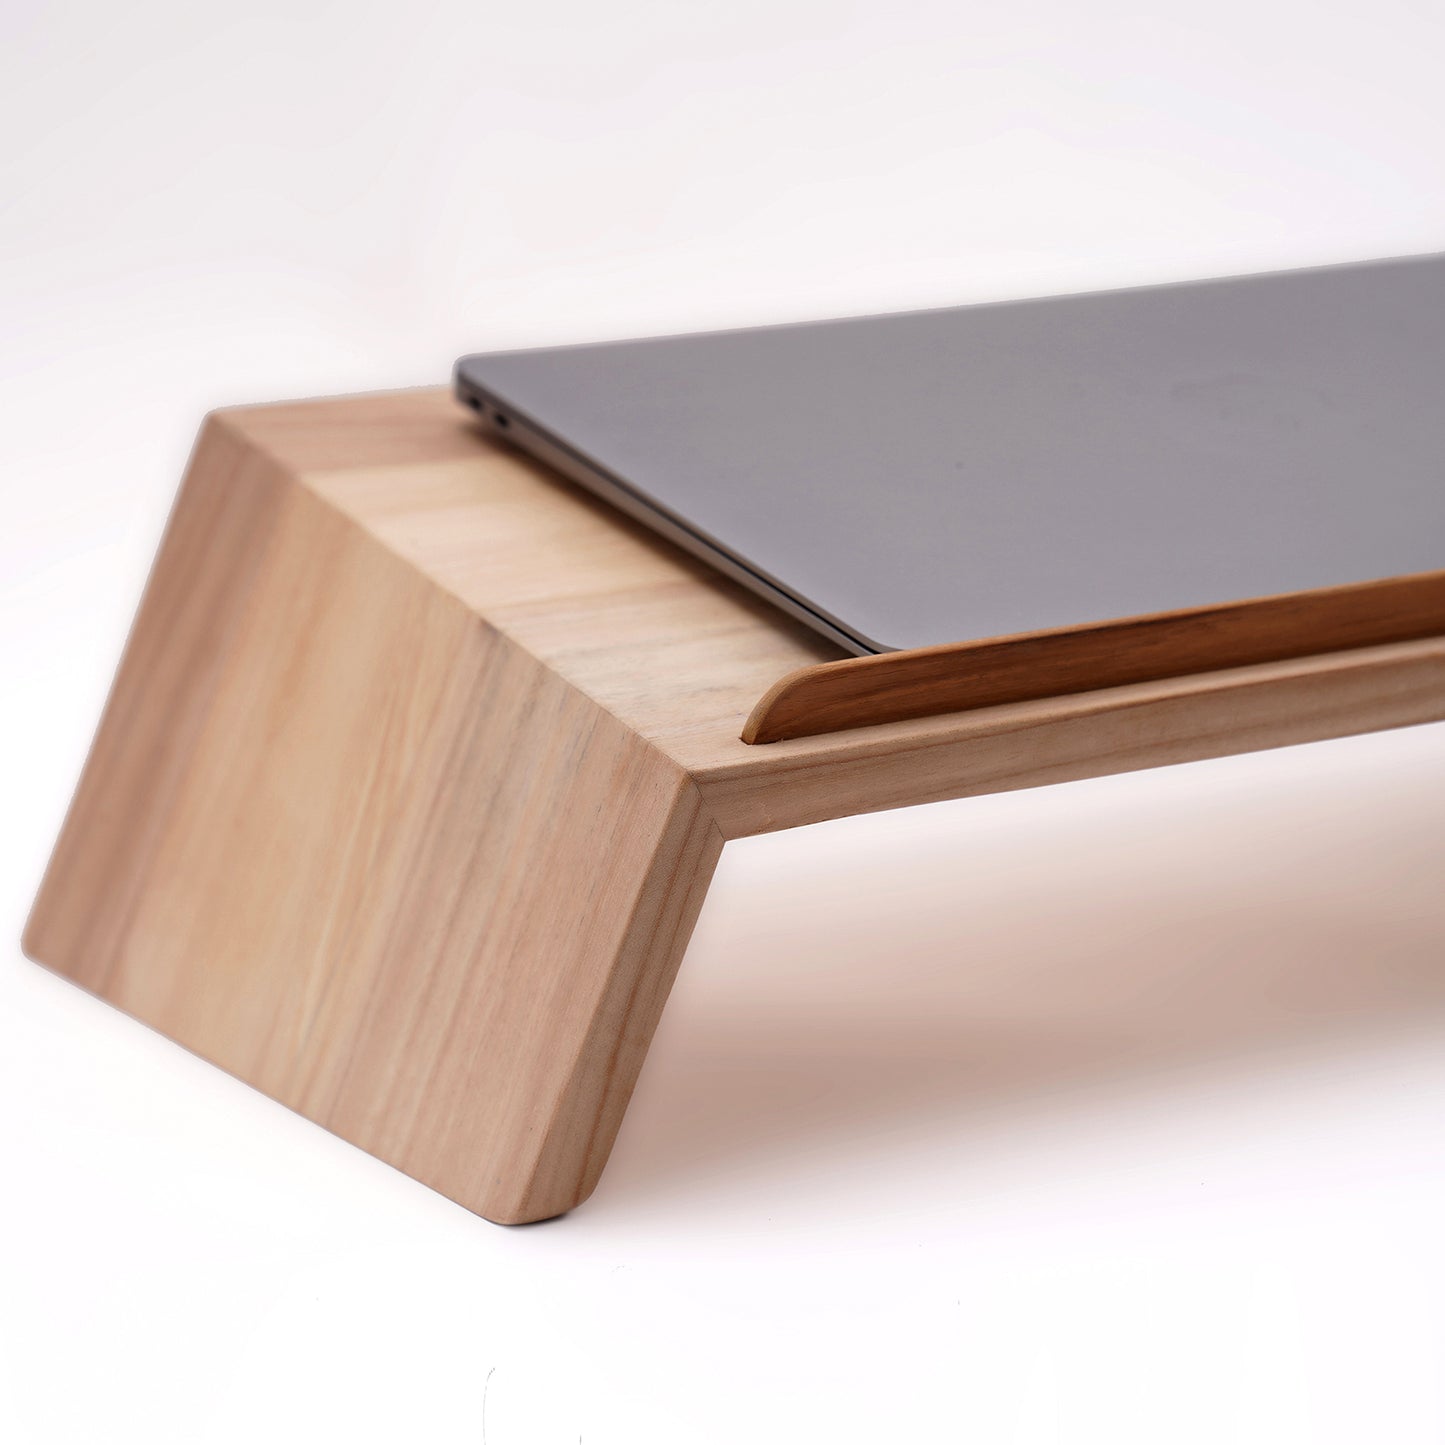 Elevate your workspace aesthetic with a wooden MacBook stand, embodying premium quality and classy appeal.